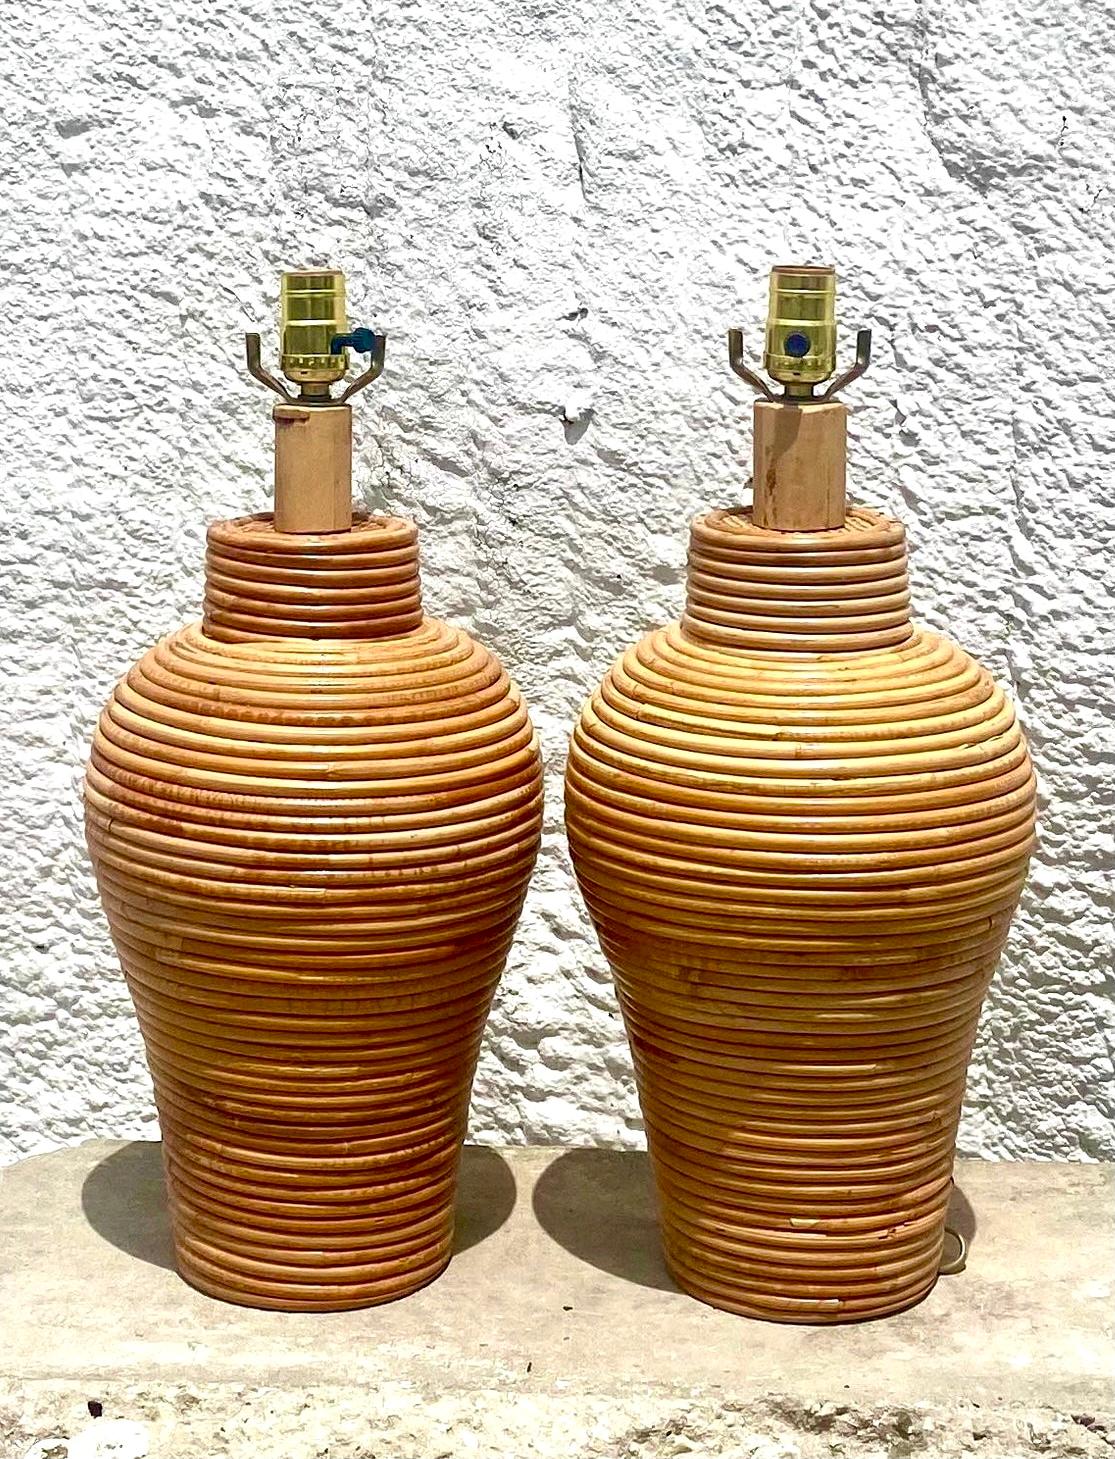 Incredible pair of vintage Organic Modern table lamps. Beautiful wrapped pencil reed in a ginger jar shape. Polished brass hardware. Acquired from a Palm Beach estate.